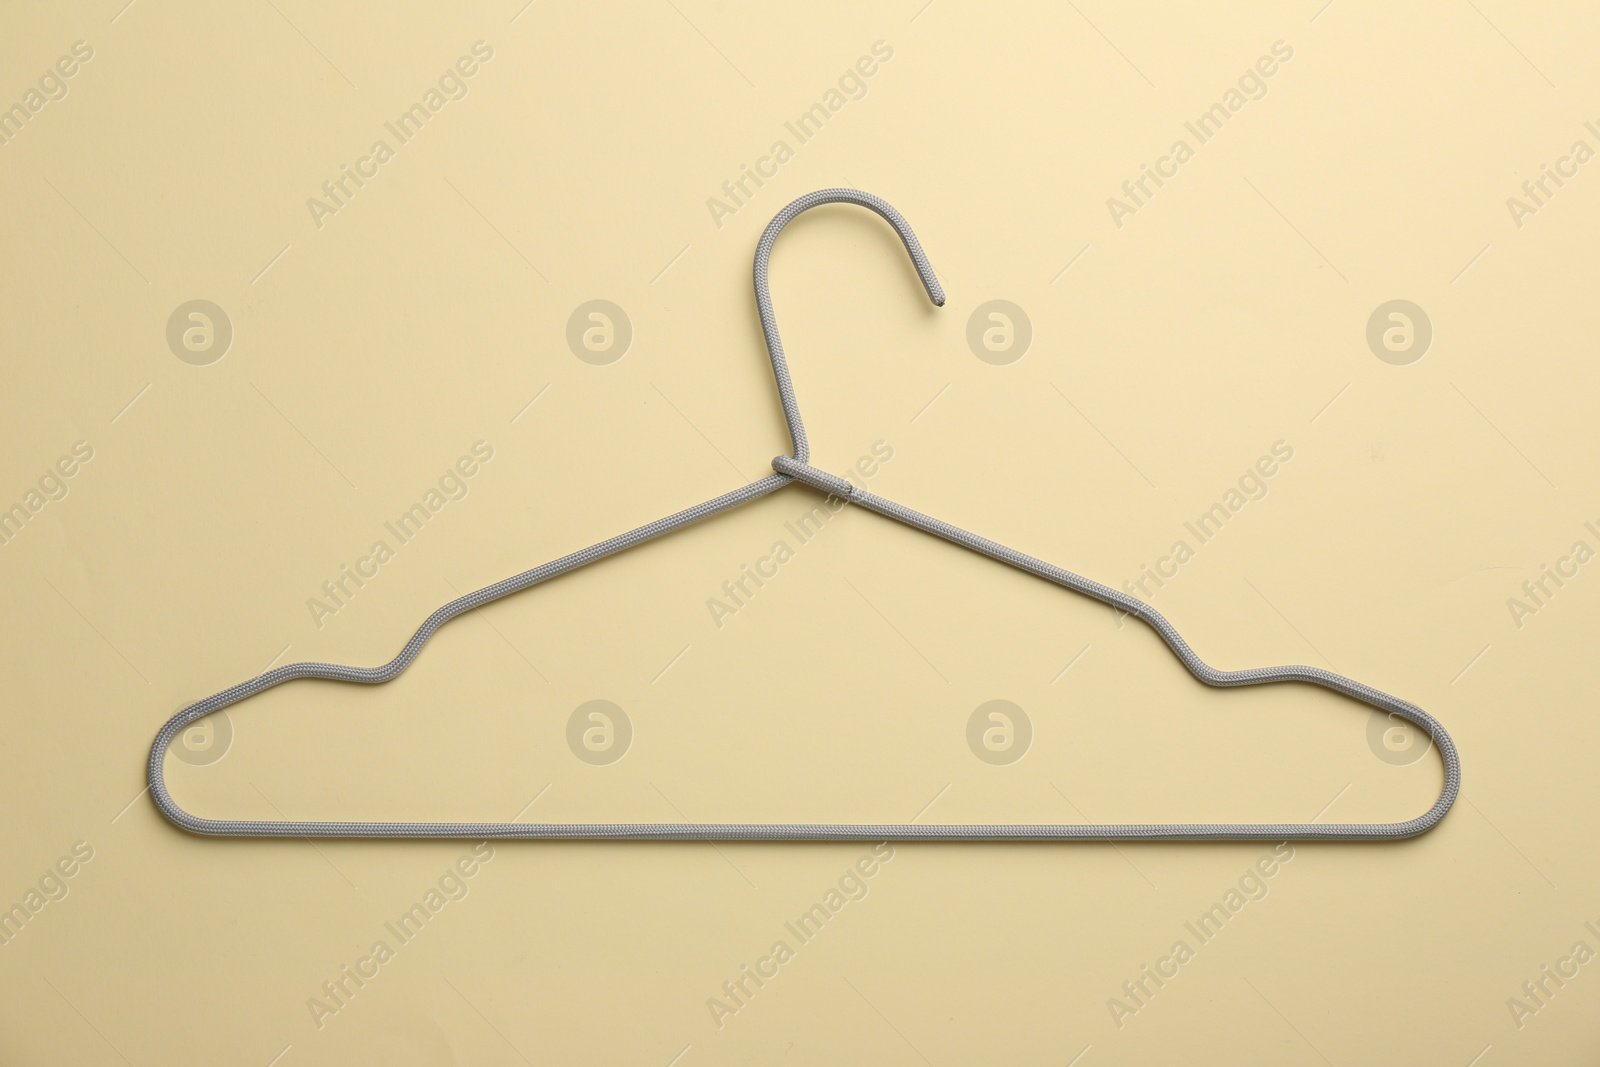 Photo of Hanger on pale yellow background, top view